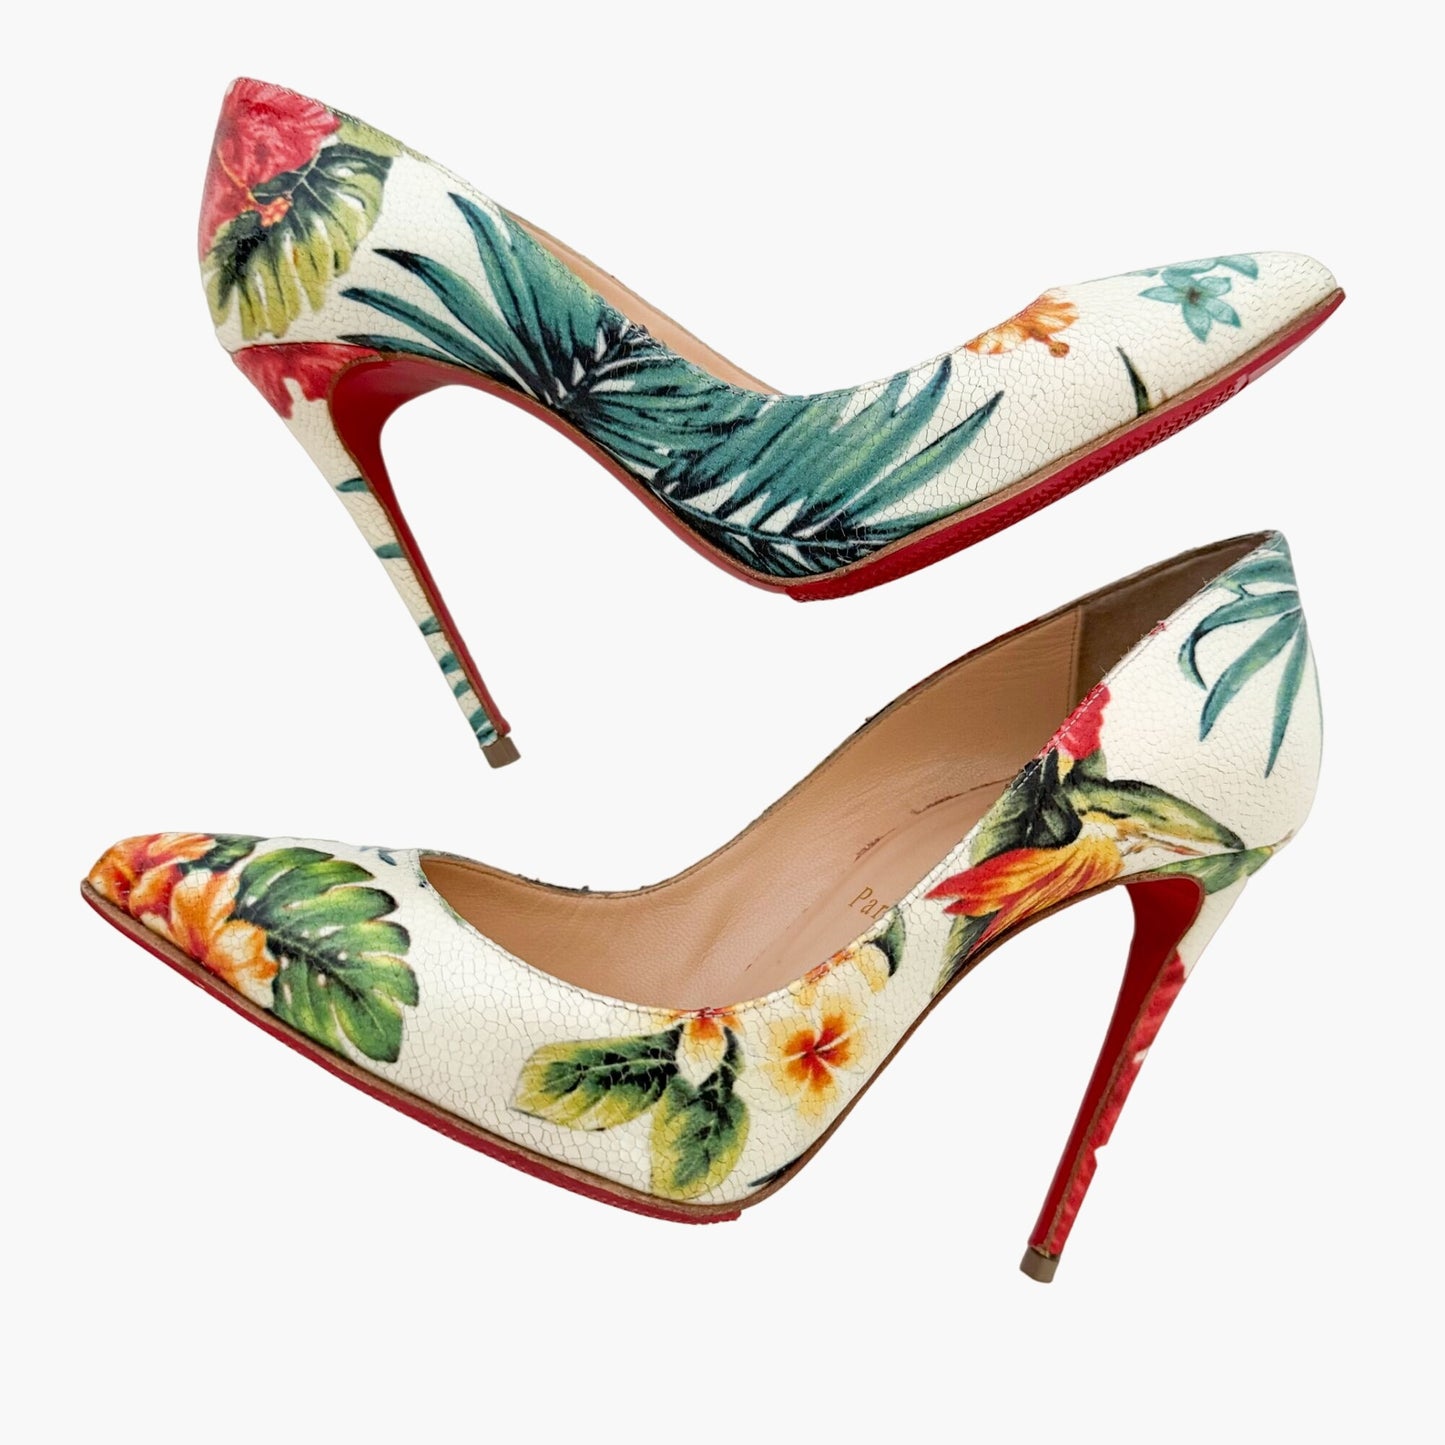 Christian Louboutin Pigalle Follies 100 Pumps in White Calf Hawaii Size 37.5